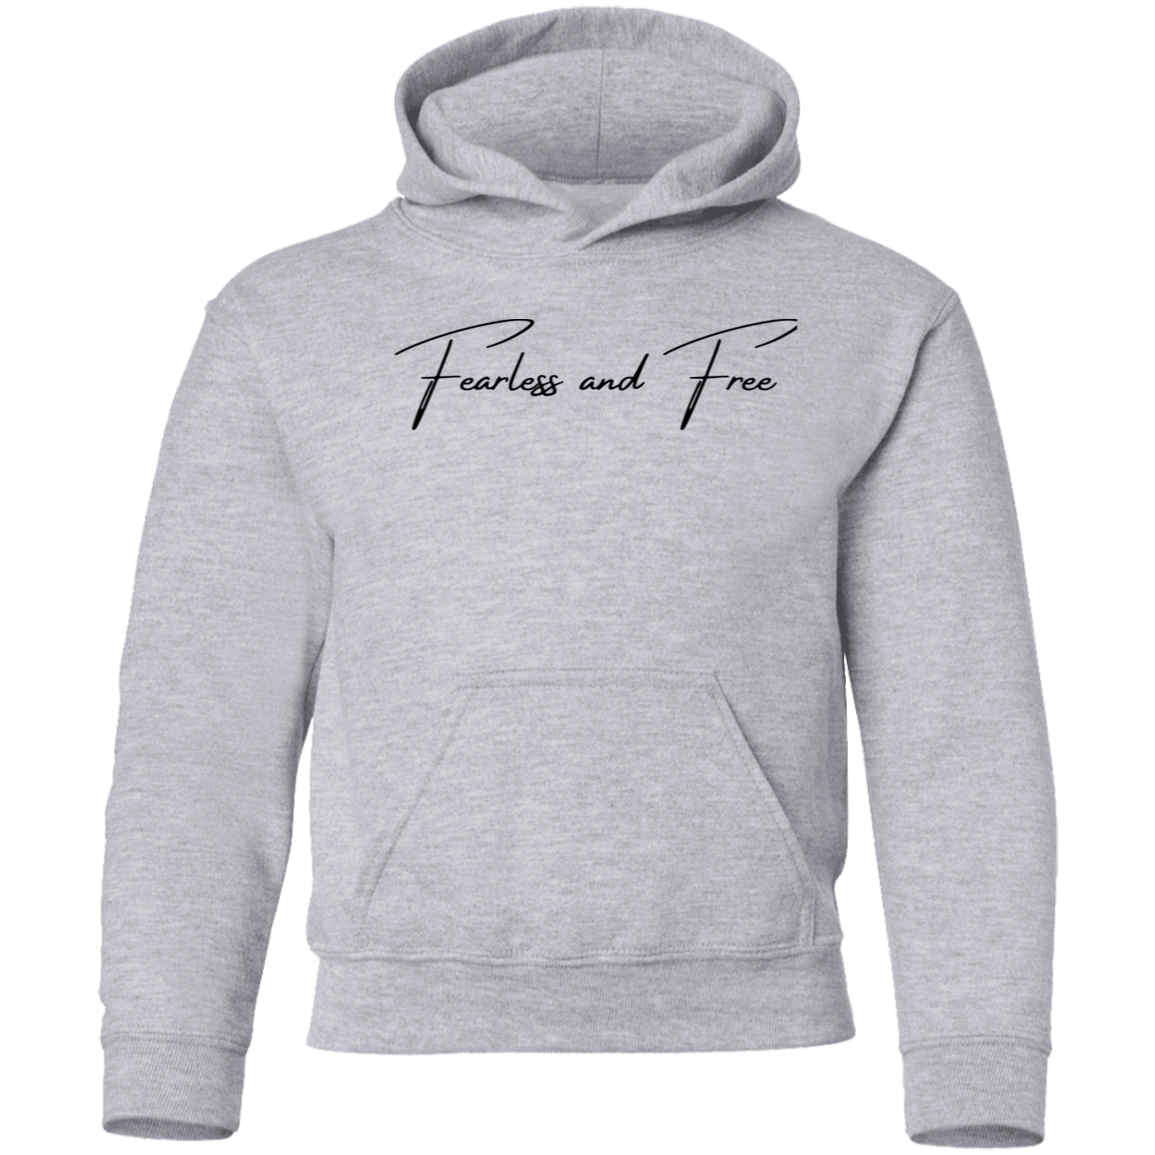 Simply Fearless and Free Youth Hoodie